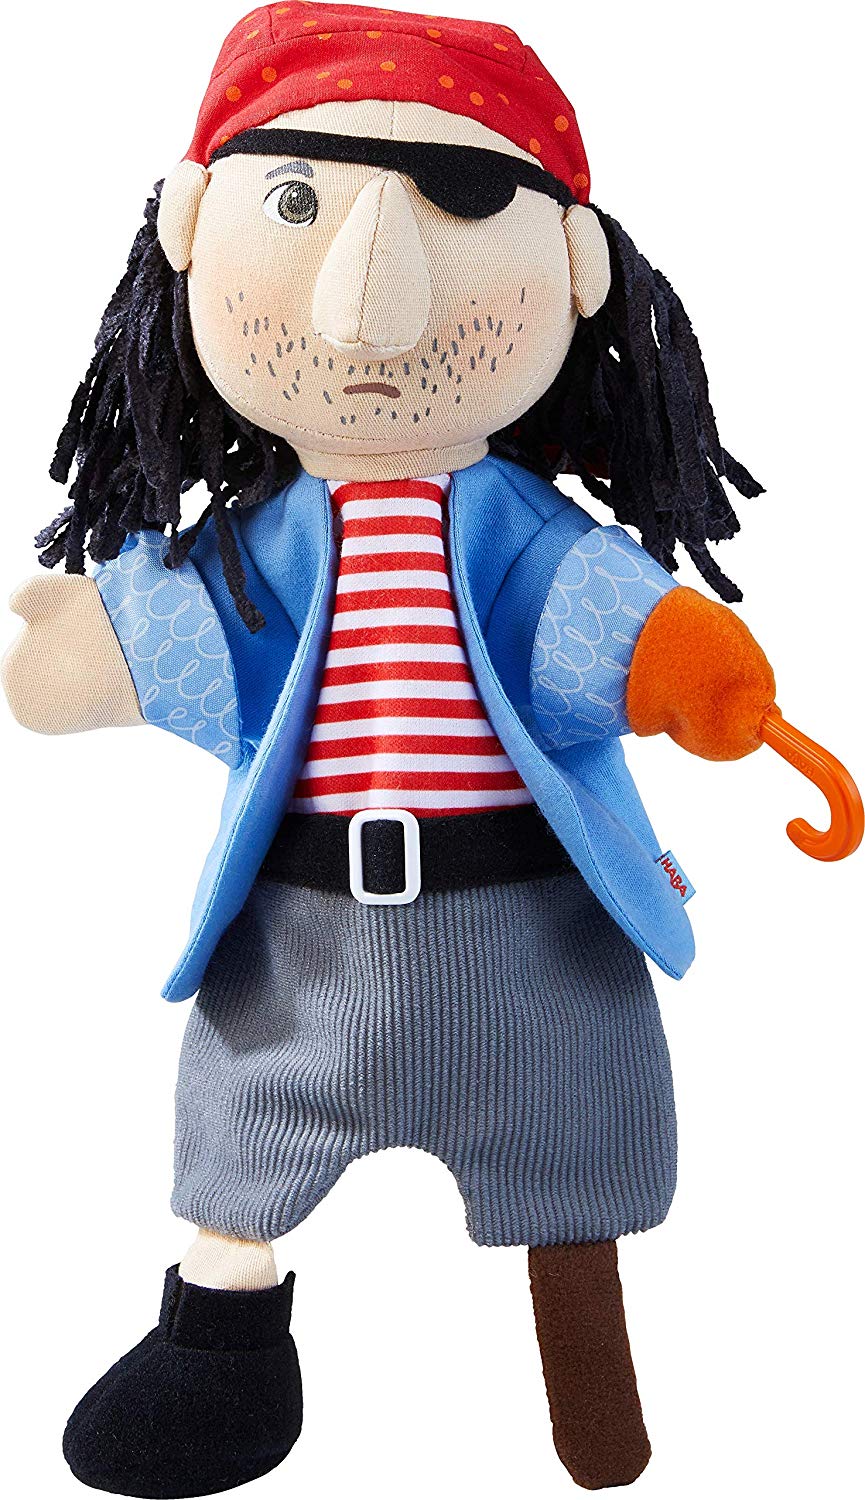 Haba 304254 Soft Pirate Hand Puppet For First Role Playing And Puppet Theat